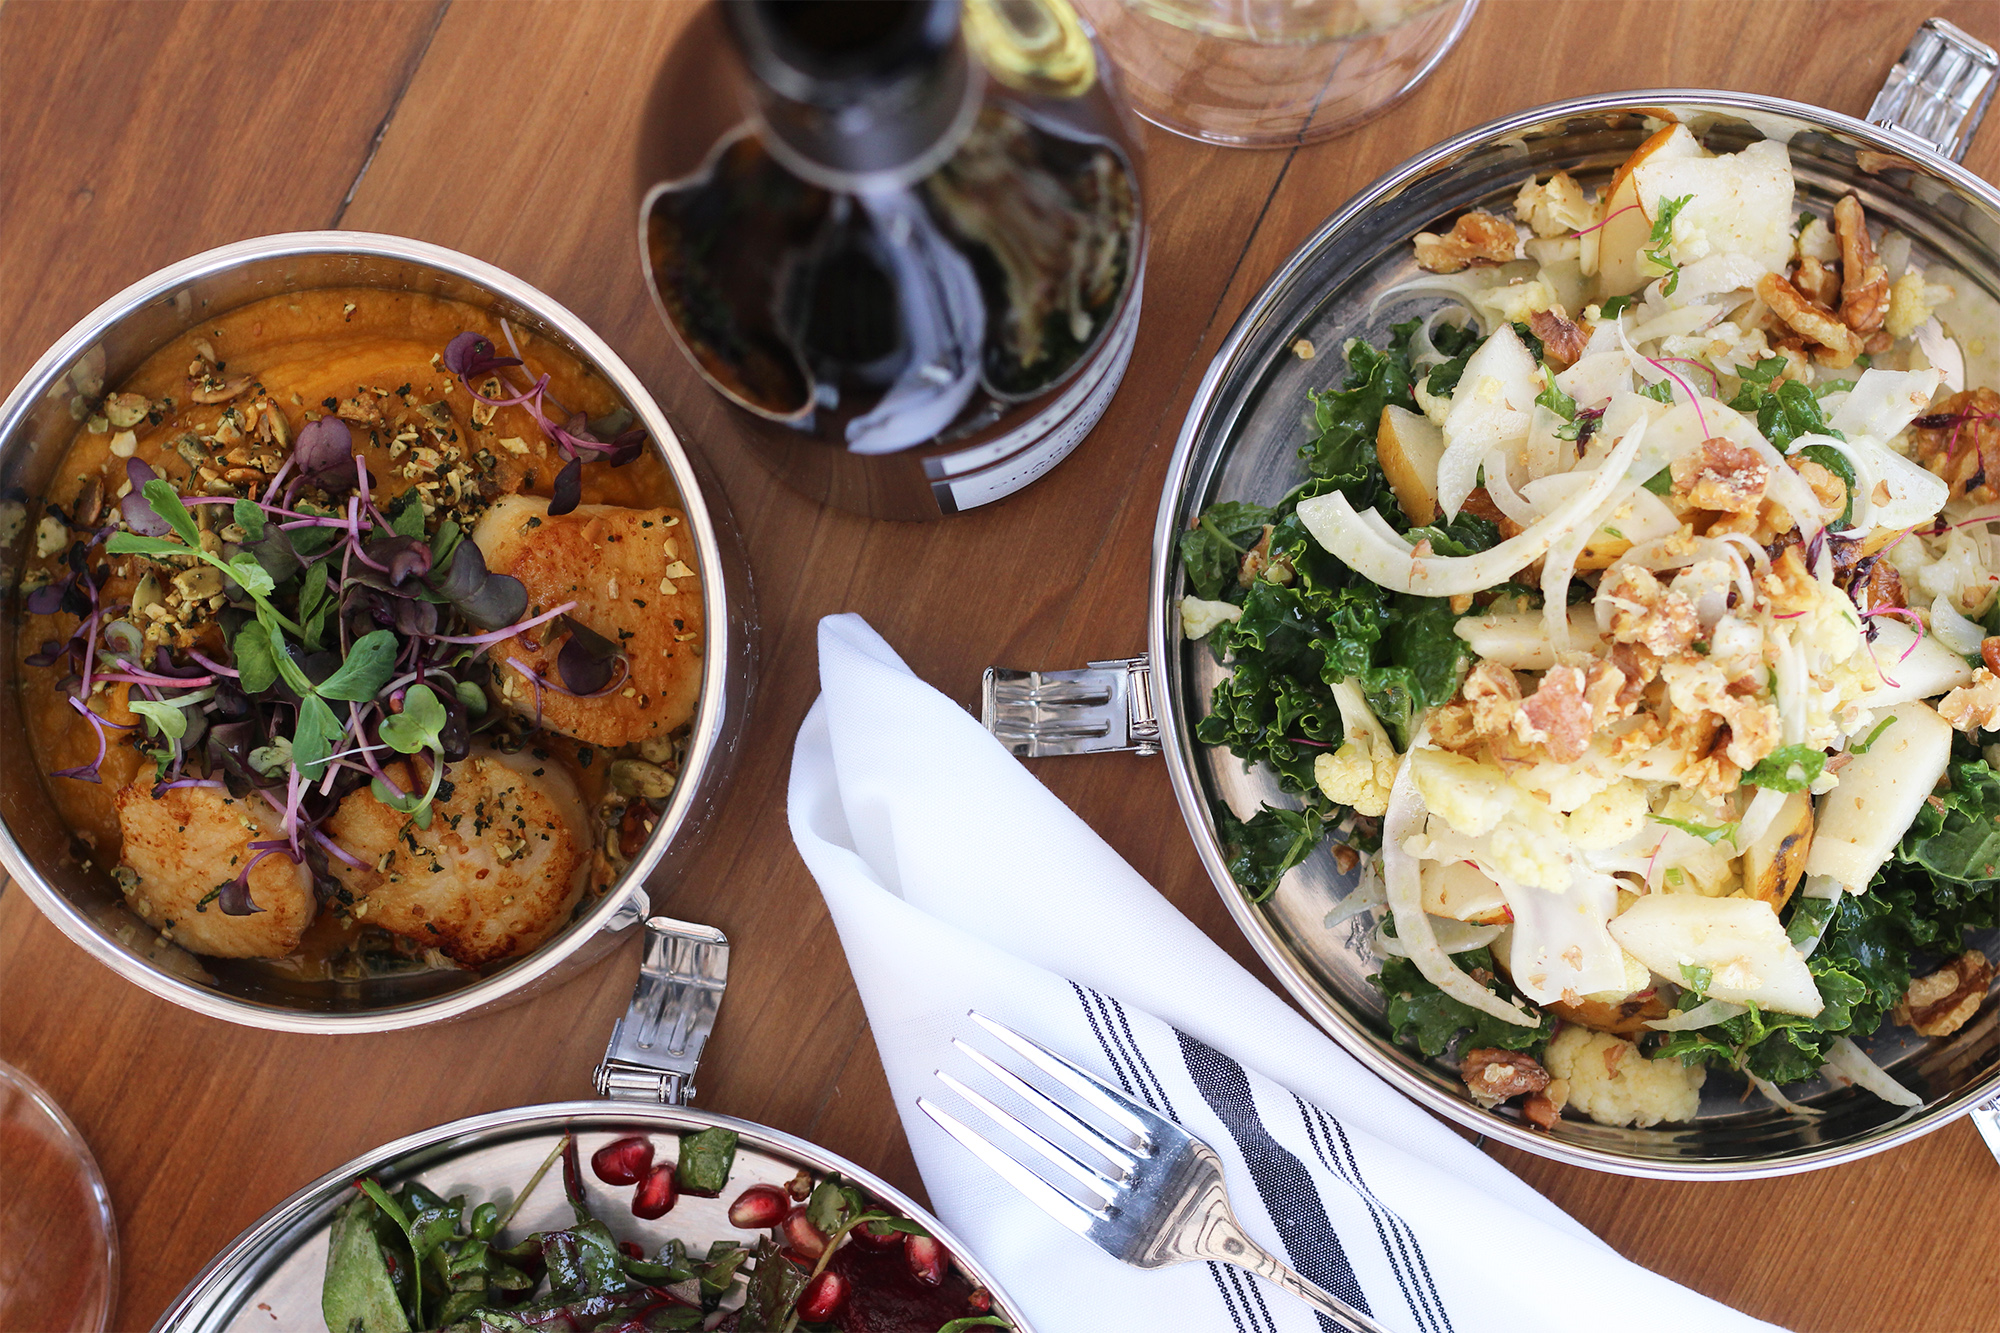 Dishes on our Fall menu: scallops, chopped garden salad, pear salad.